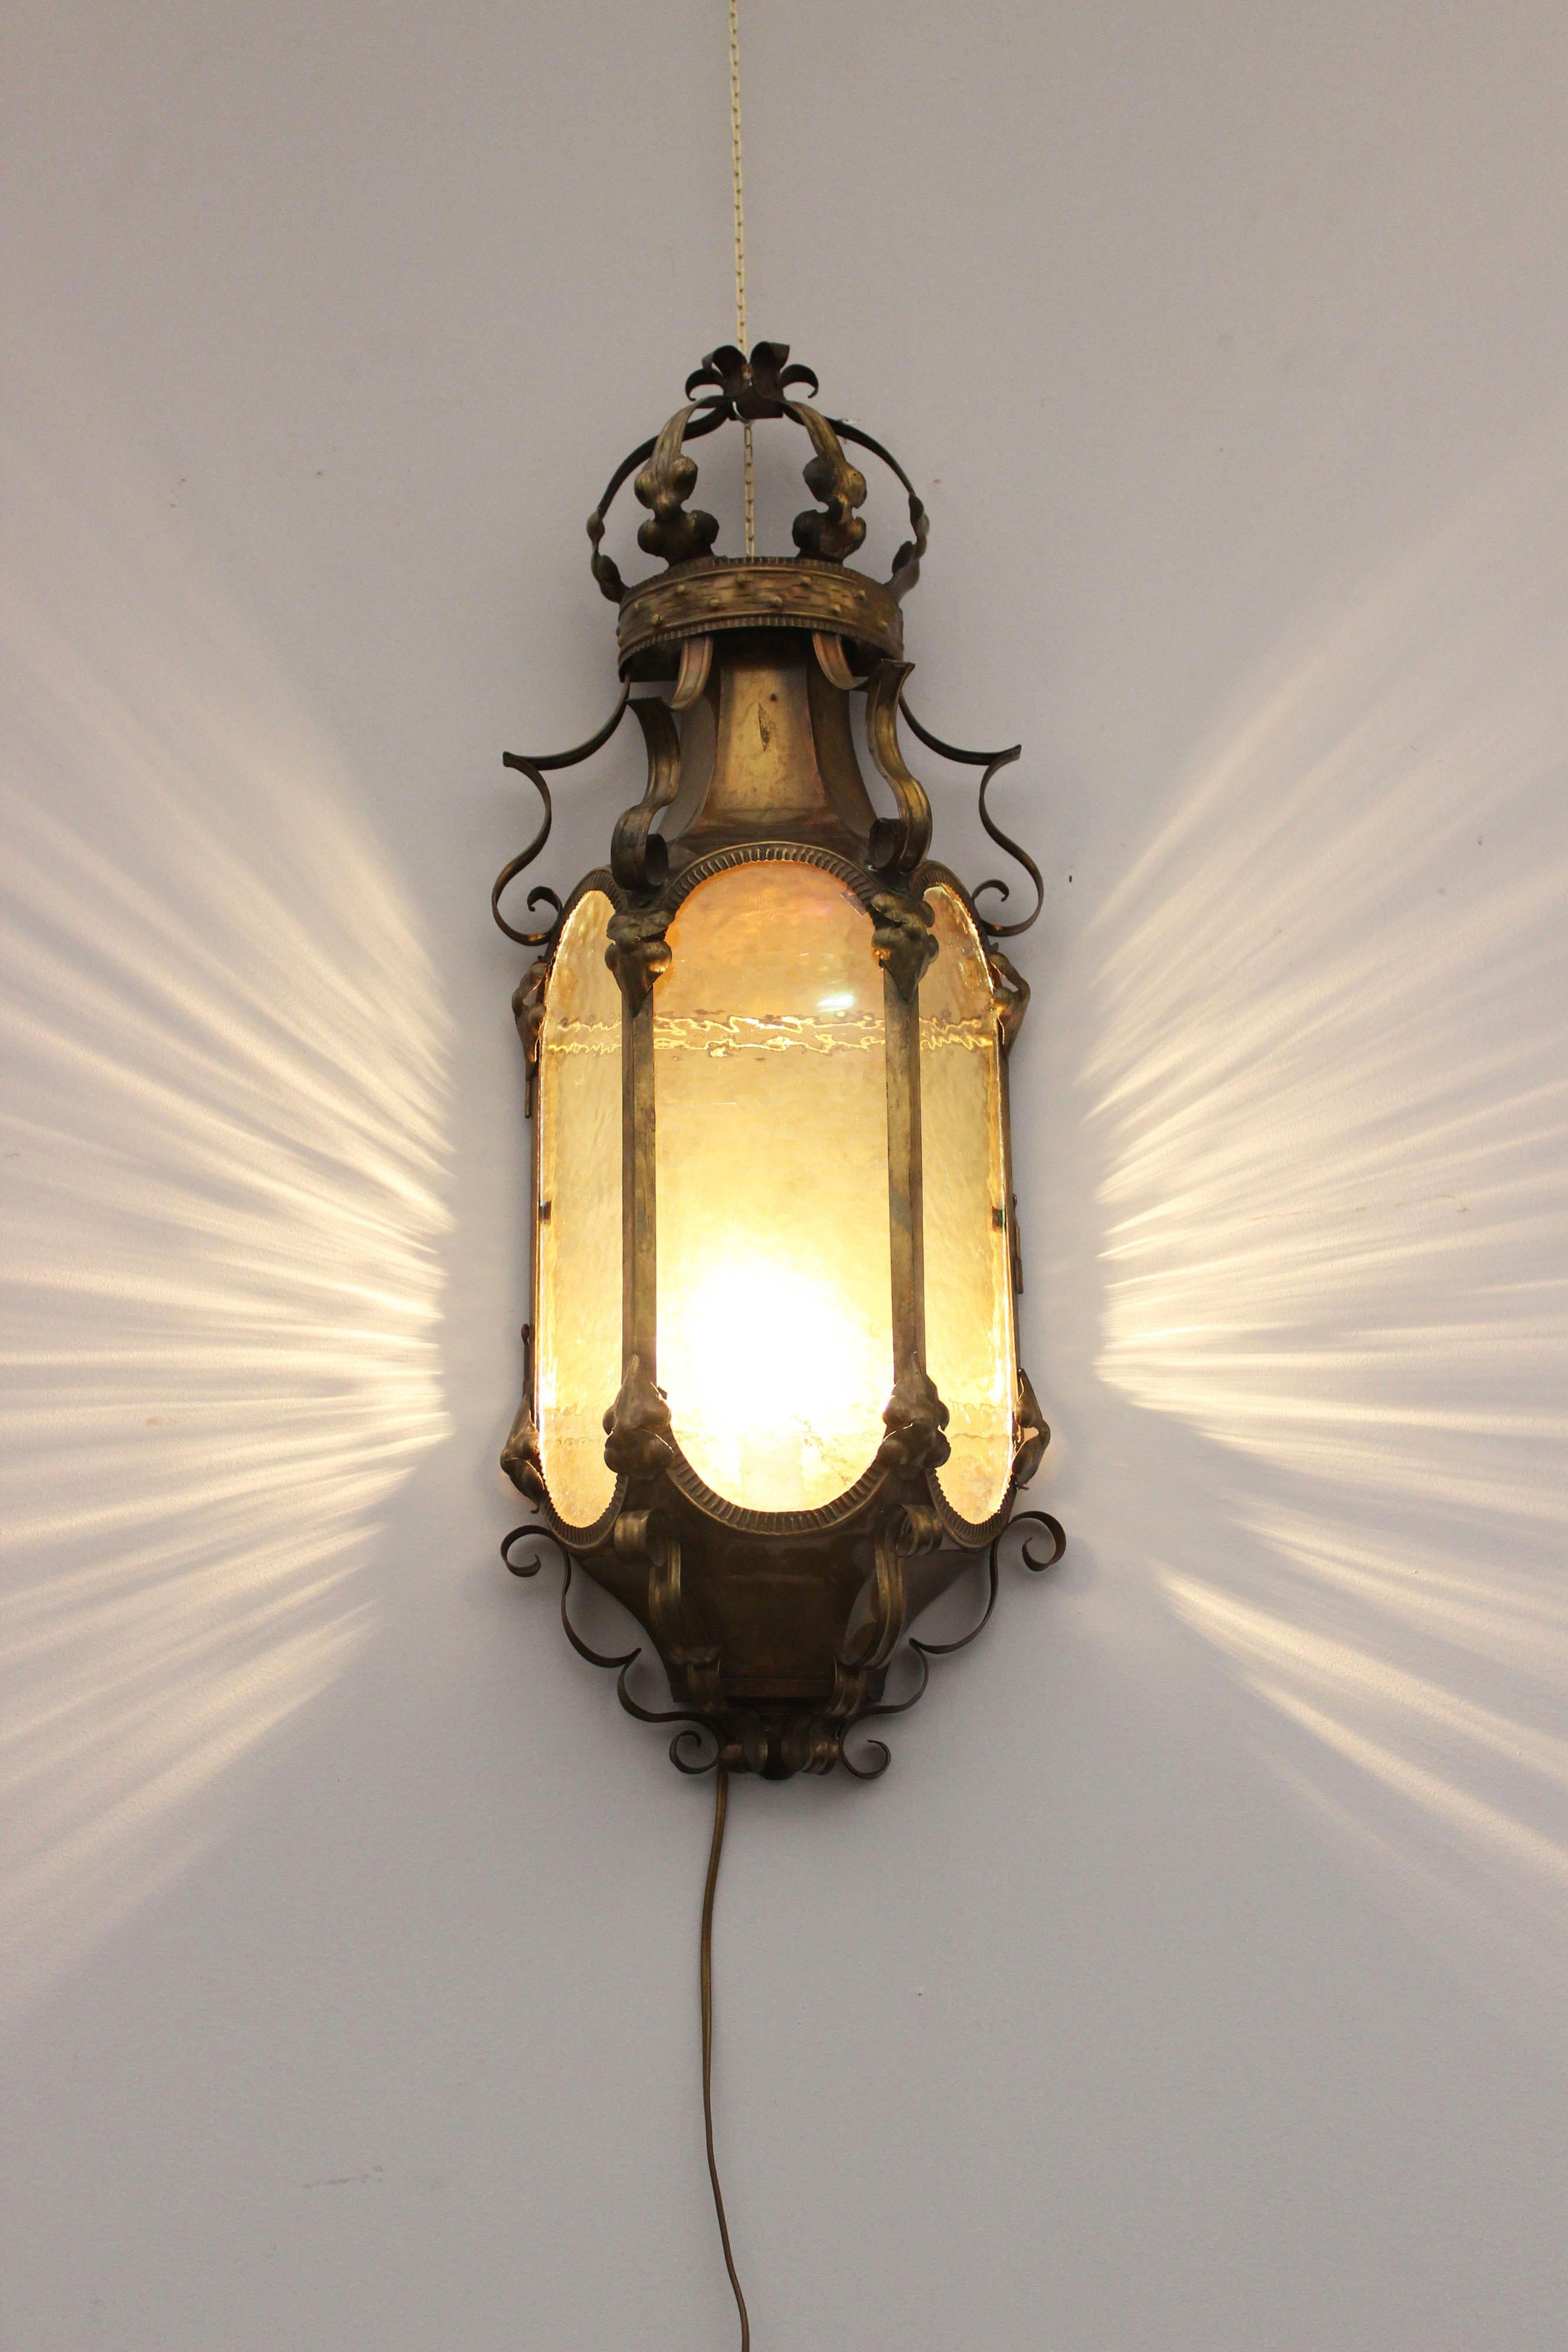 Antique Brass Sconce In Excellent Condition For Sale In Montelabbate, PU